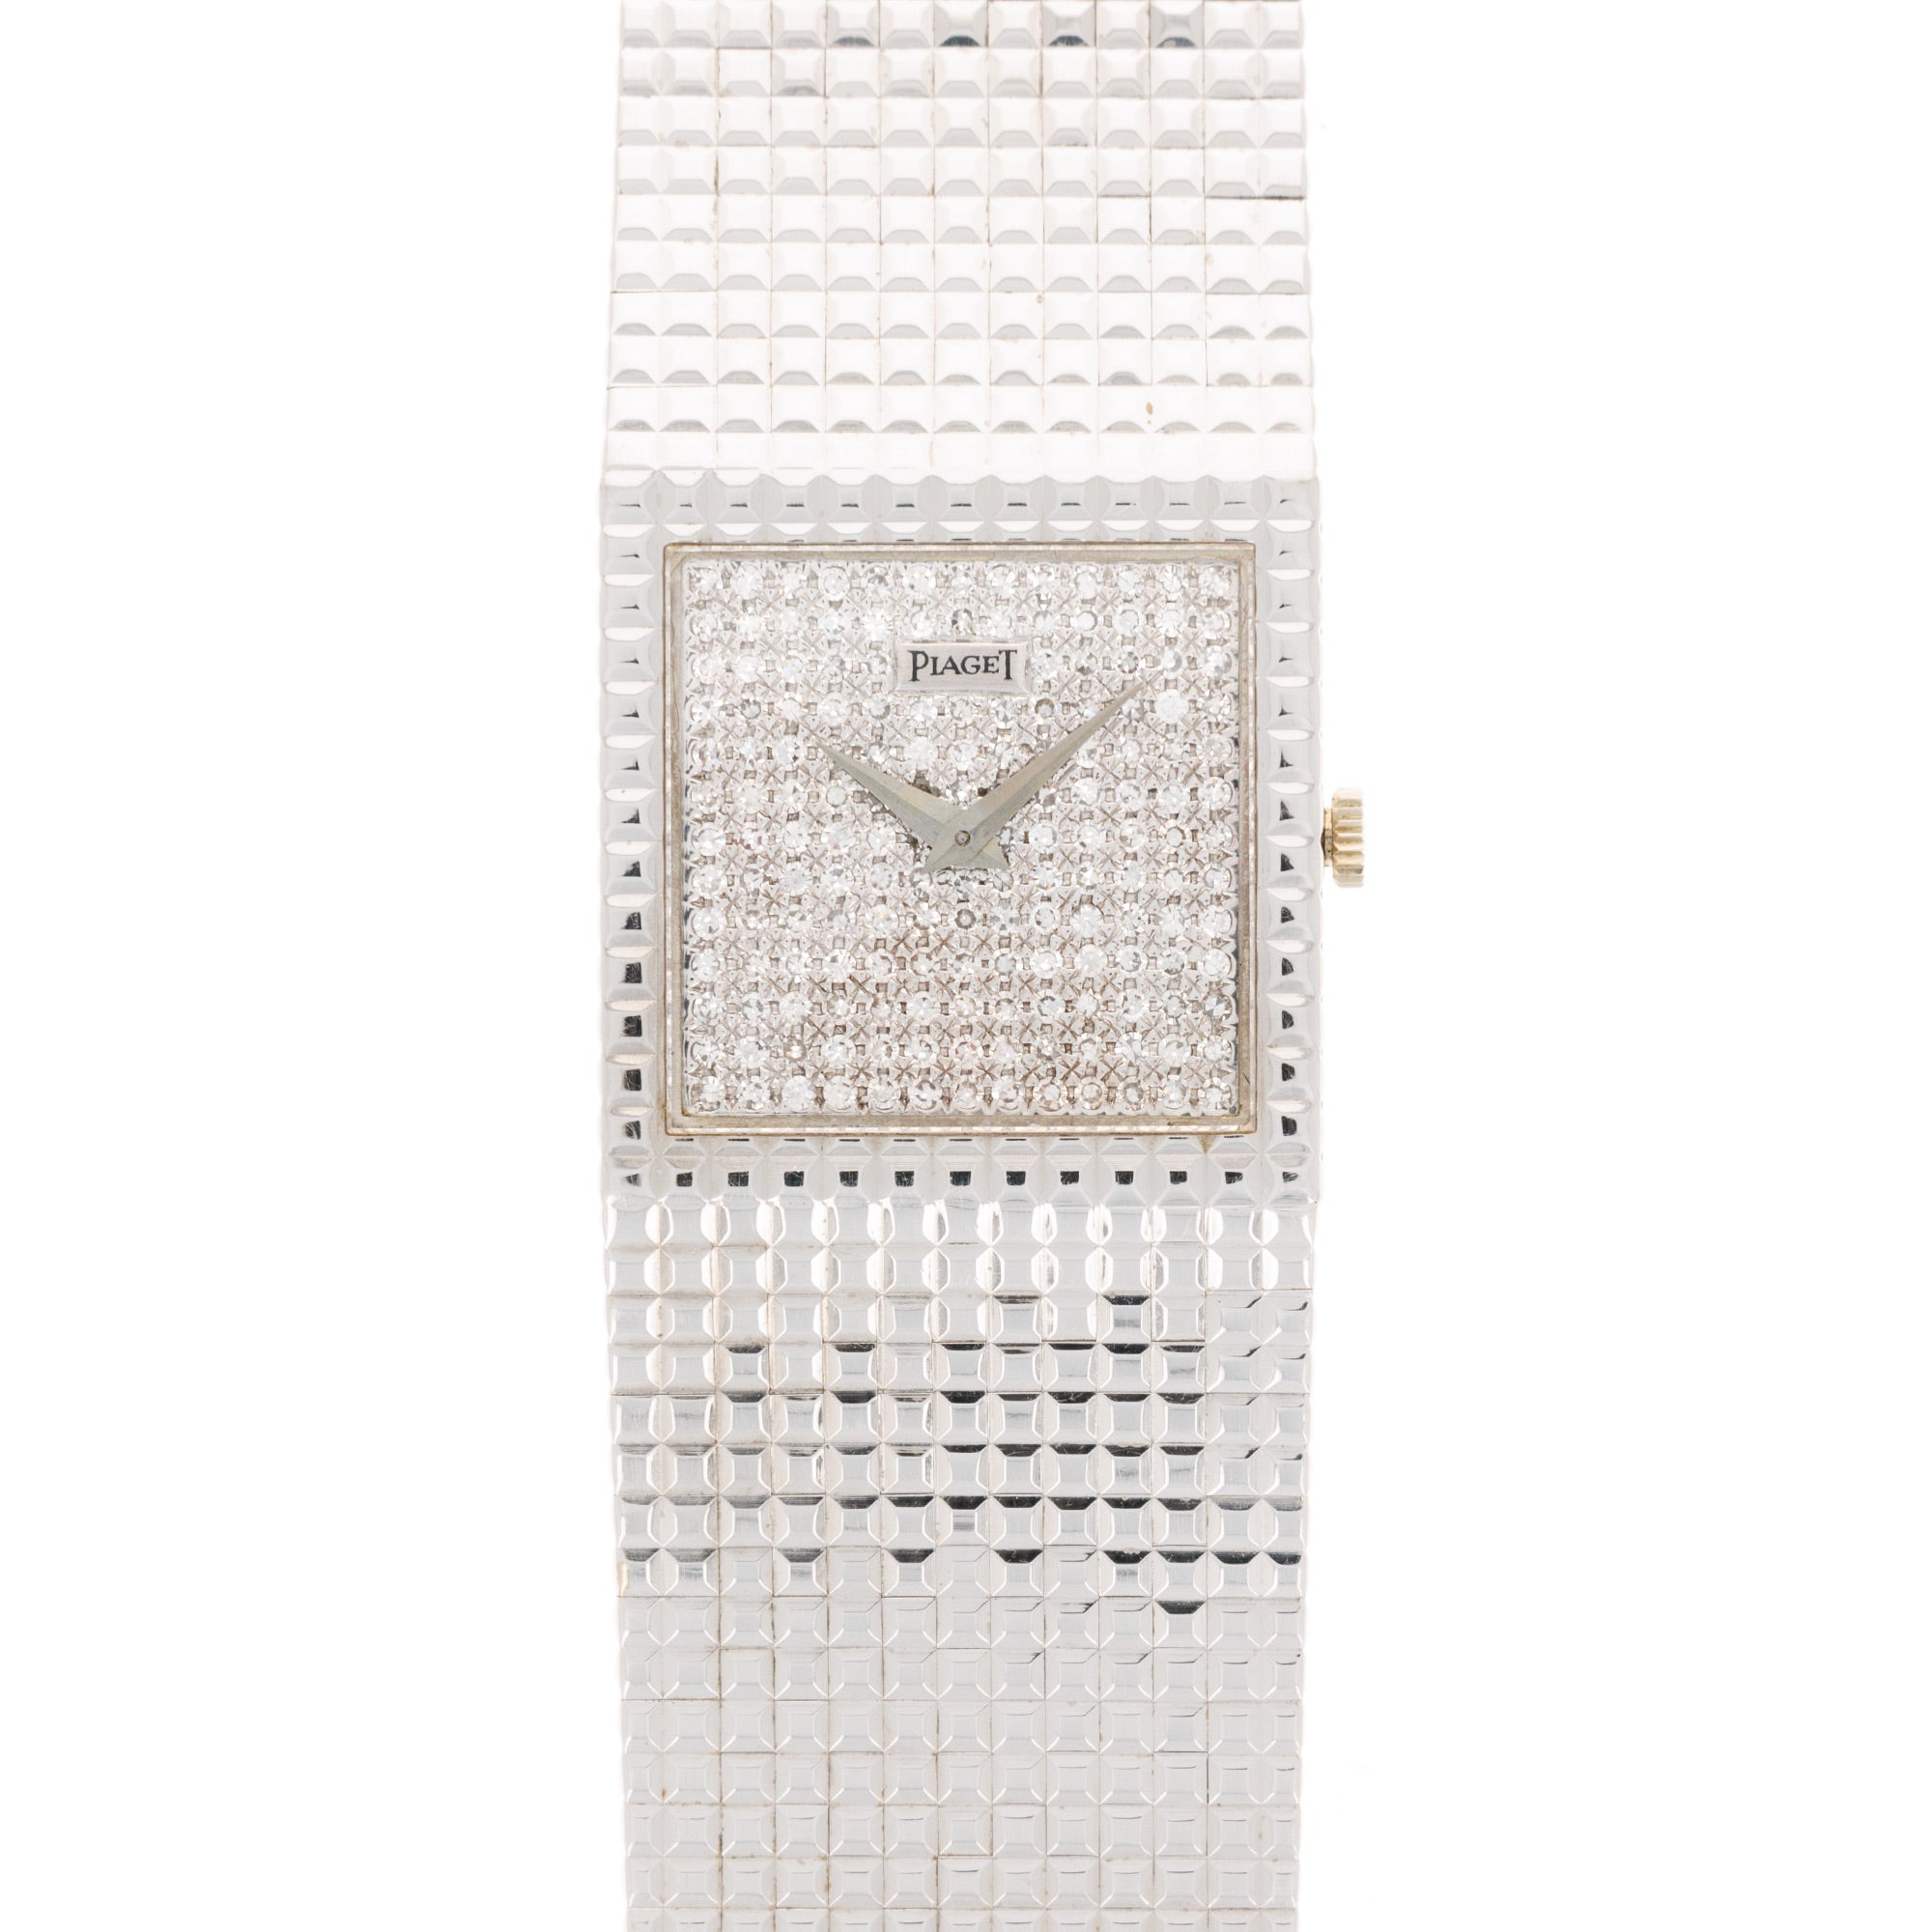 Piaget - Piaget White Gold Pave Watch Ref. 9352H24 - The Keystone Watches